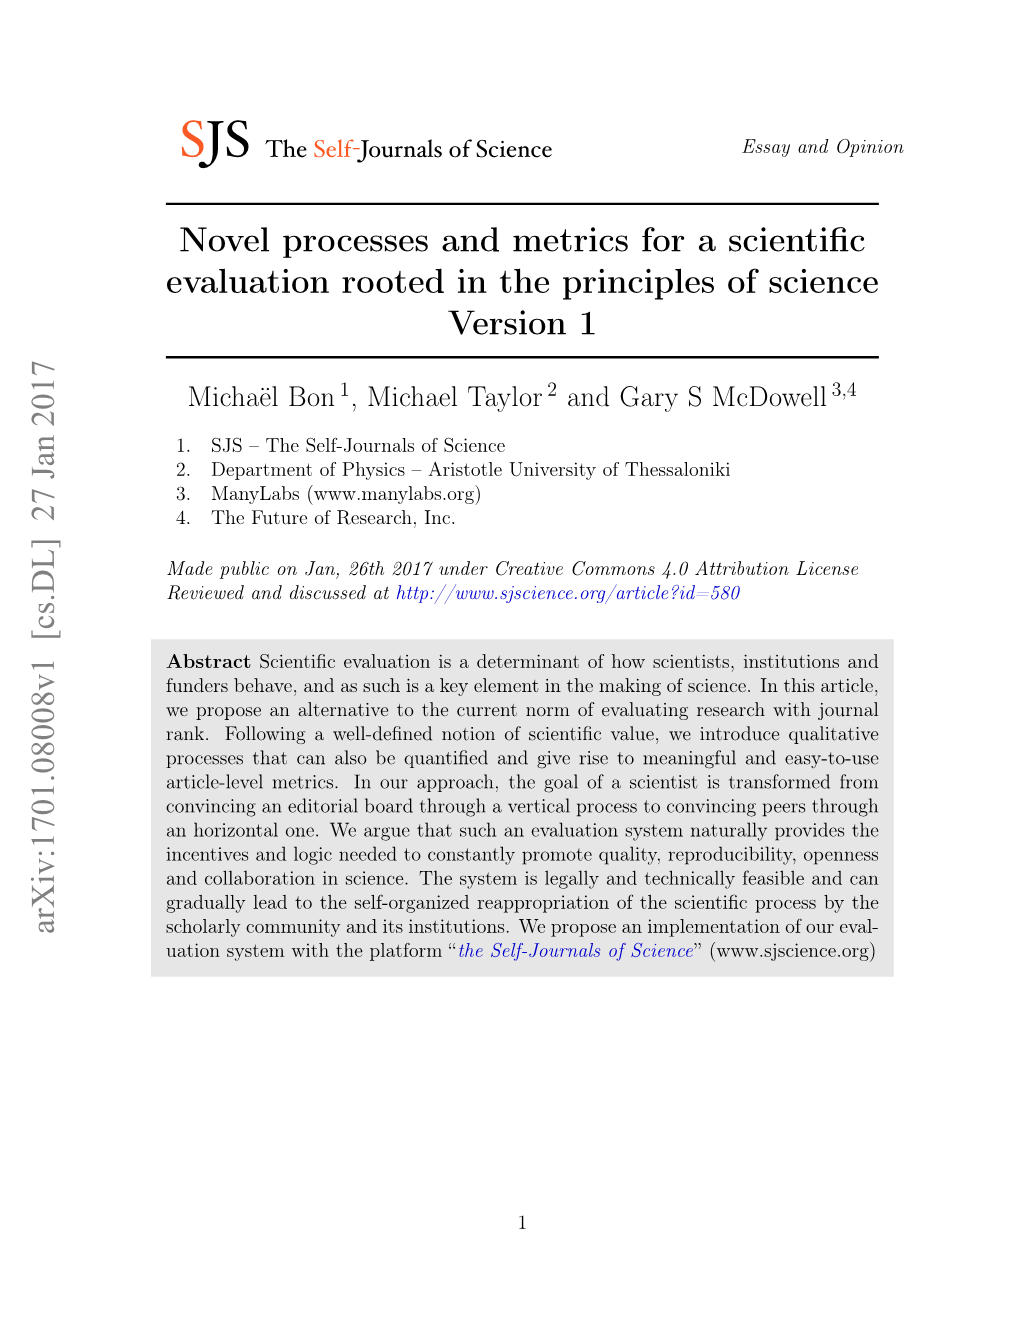 Novel Processes and Metrics for a Scientific Evaluation Rooted in the Principles of Science Version 1 Arxiv:1701.08008V1 [Cs.DL